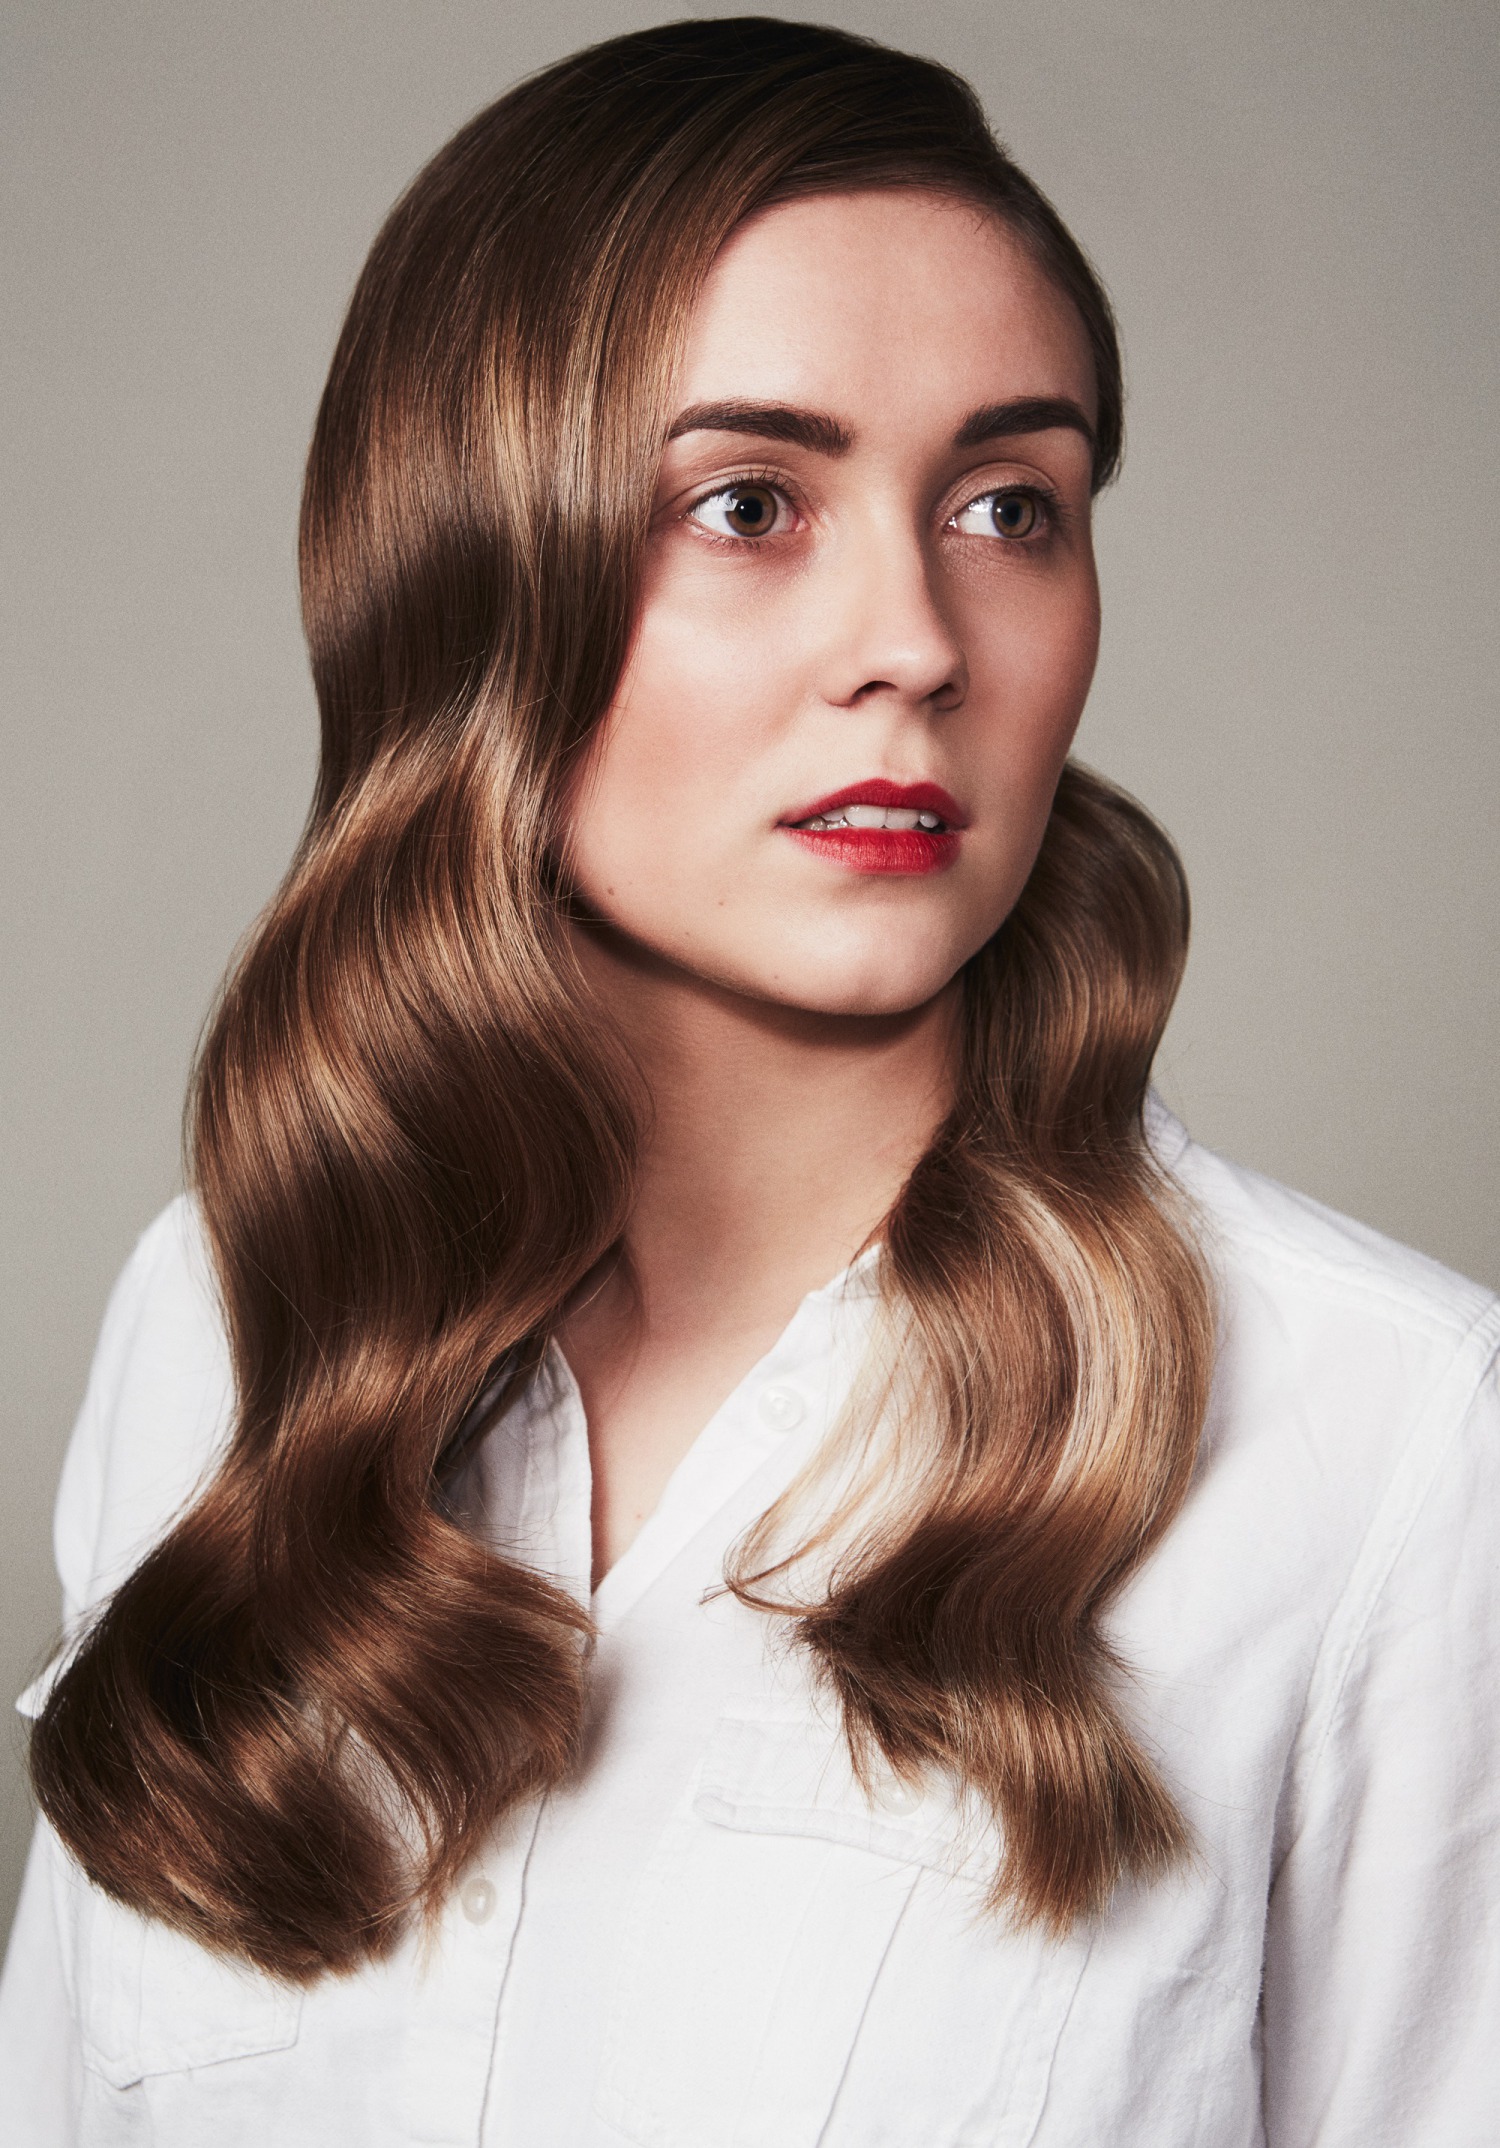 Post-salon Colouring: How to maintain hair vitality and shine